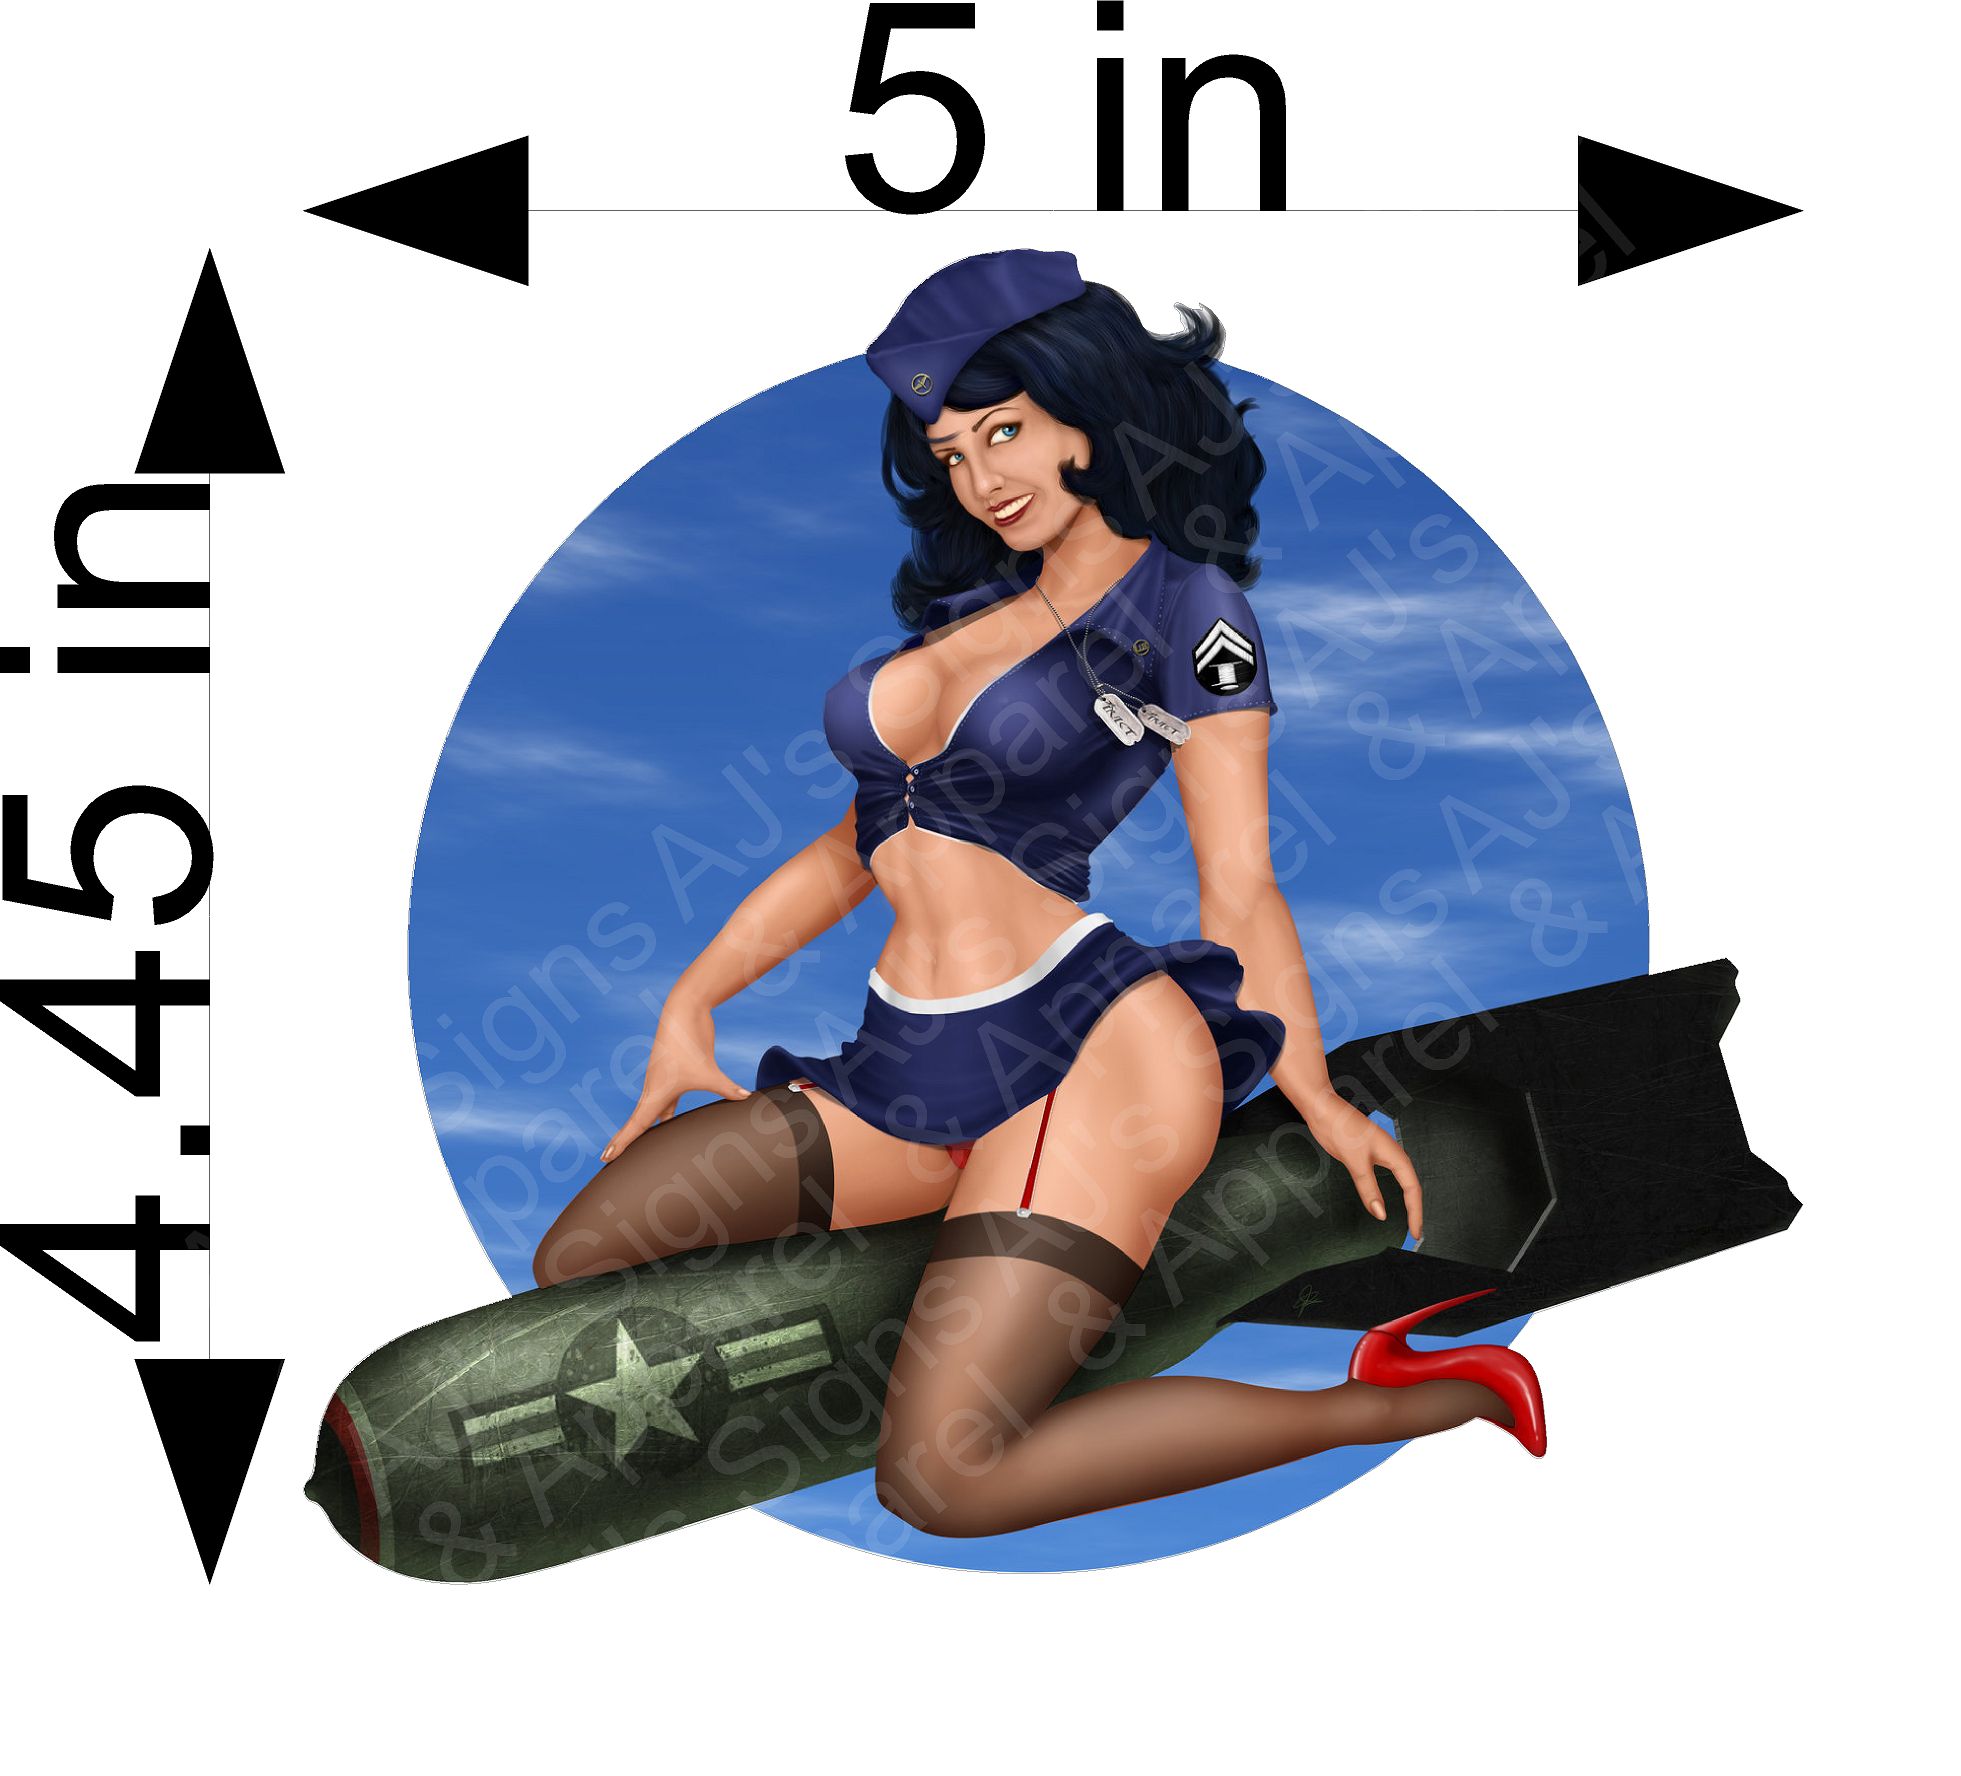 Details about   Pinup Girl Vinyl Graphic Stickers Pinup Decals Set of 2 Bombshell Betty m BL 